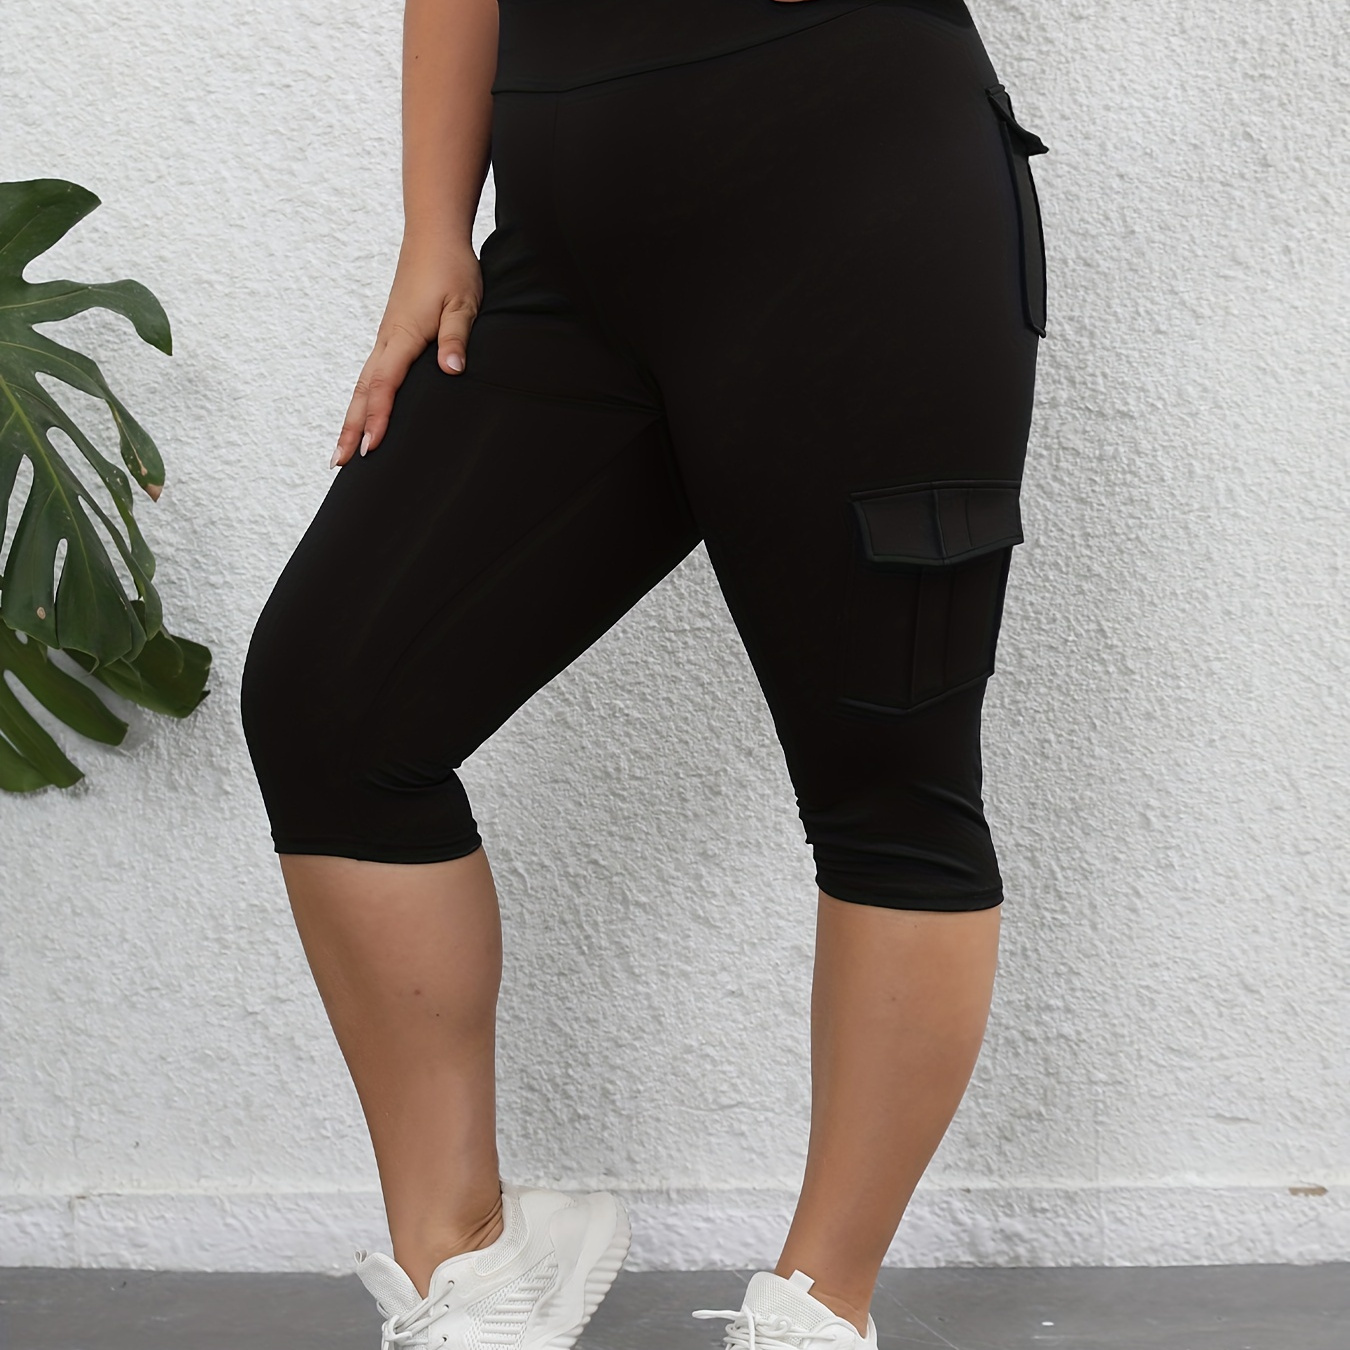 

Women's Plus Size Black Color Plain Capri Yoga Cargo Pants With Pockets, Stretchy High-waisted Workout Leggings, Breathable Athletic Cargo Pants